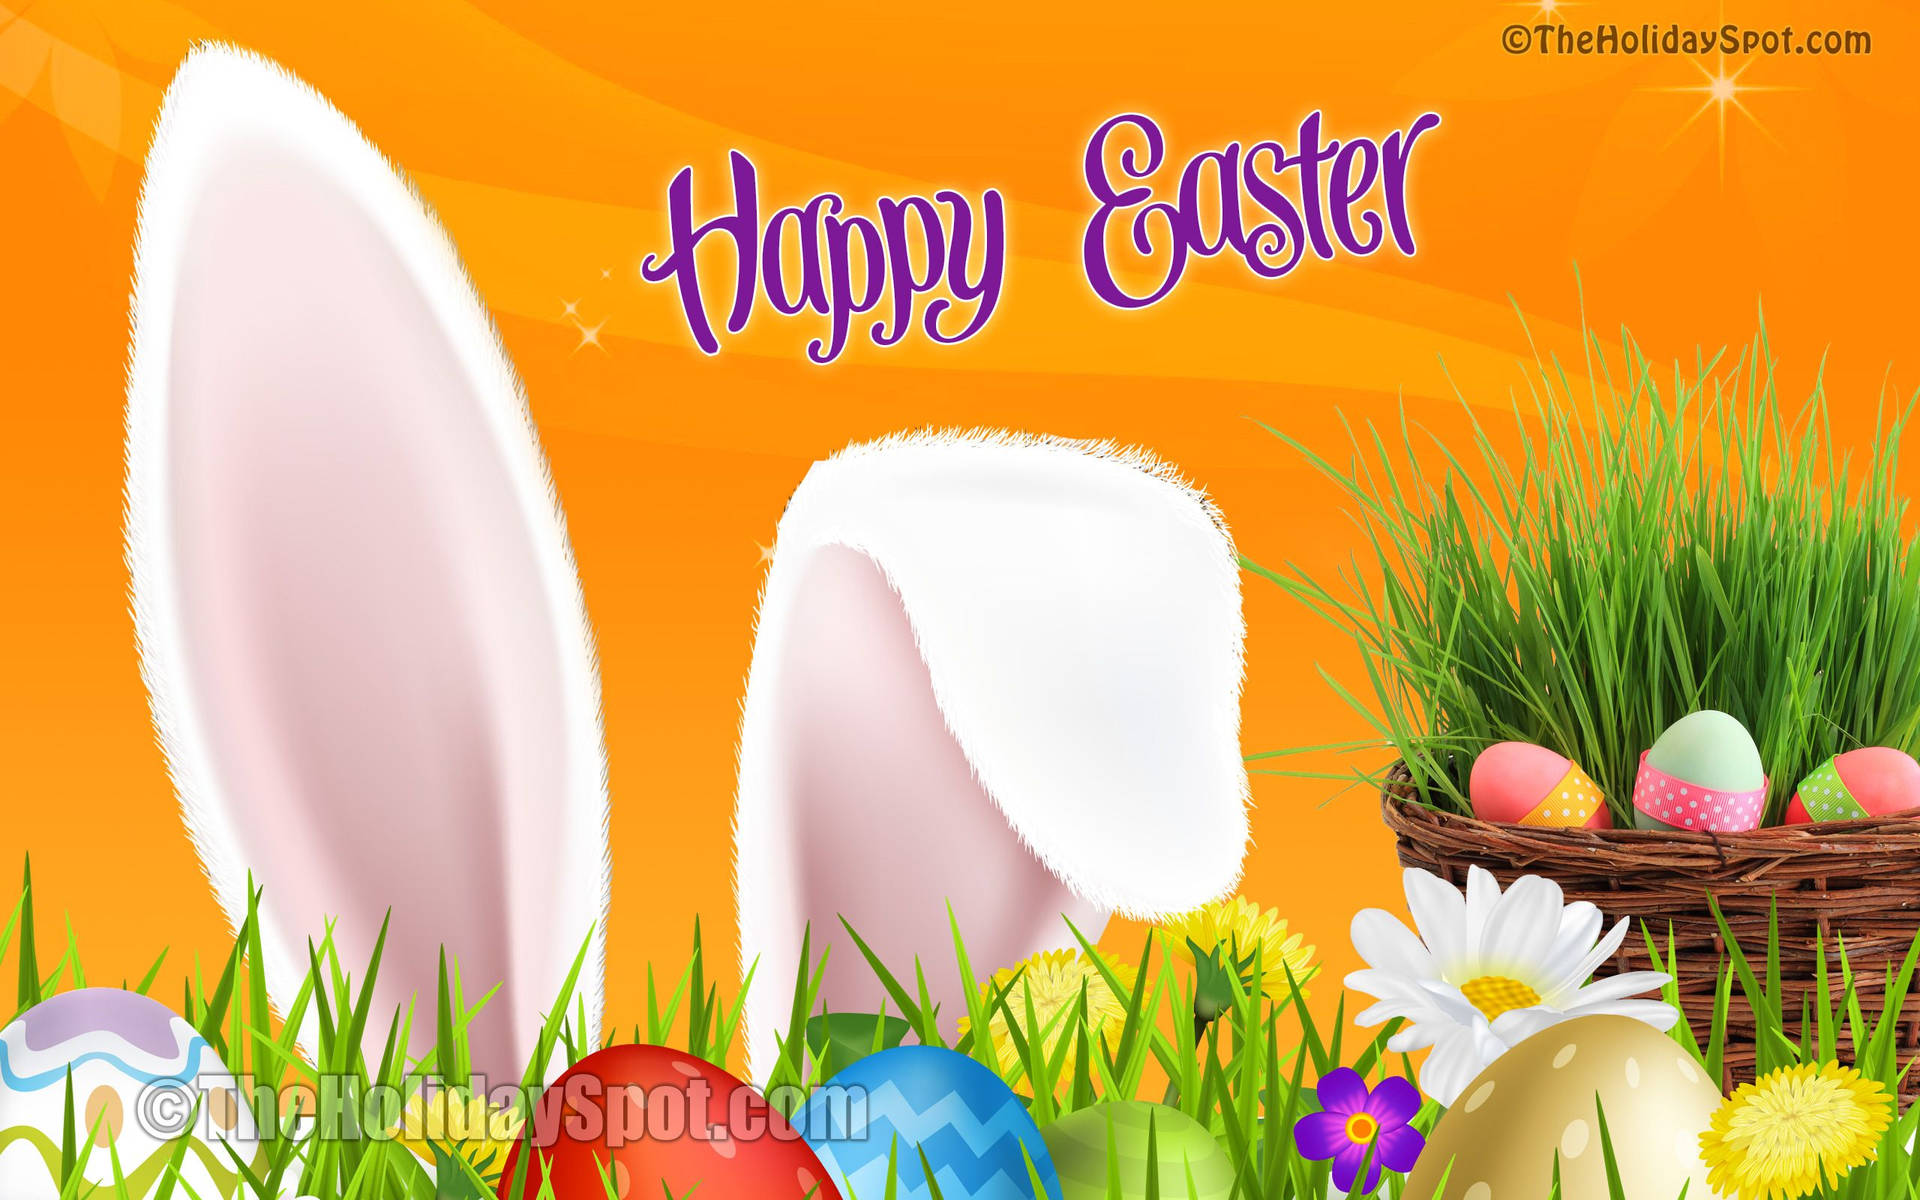 Happy Easter And Rabbit's Ears Background